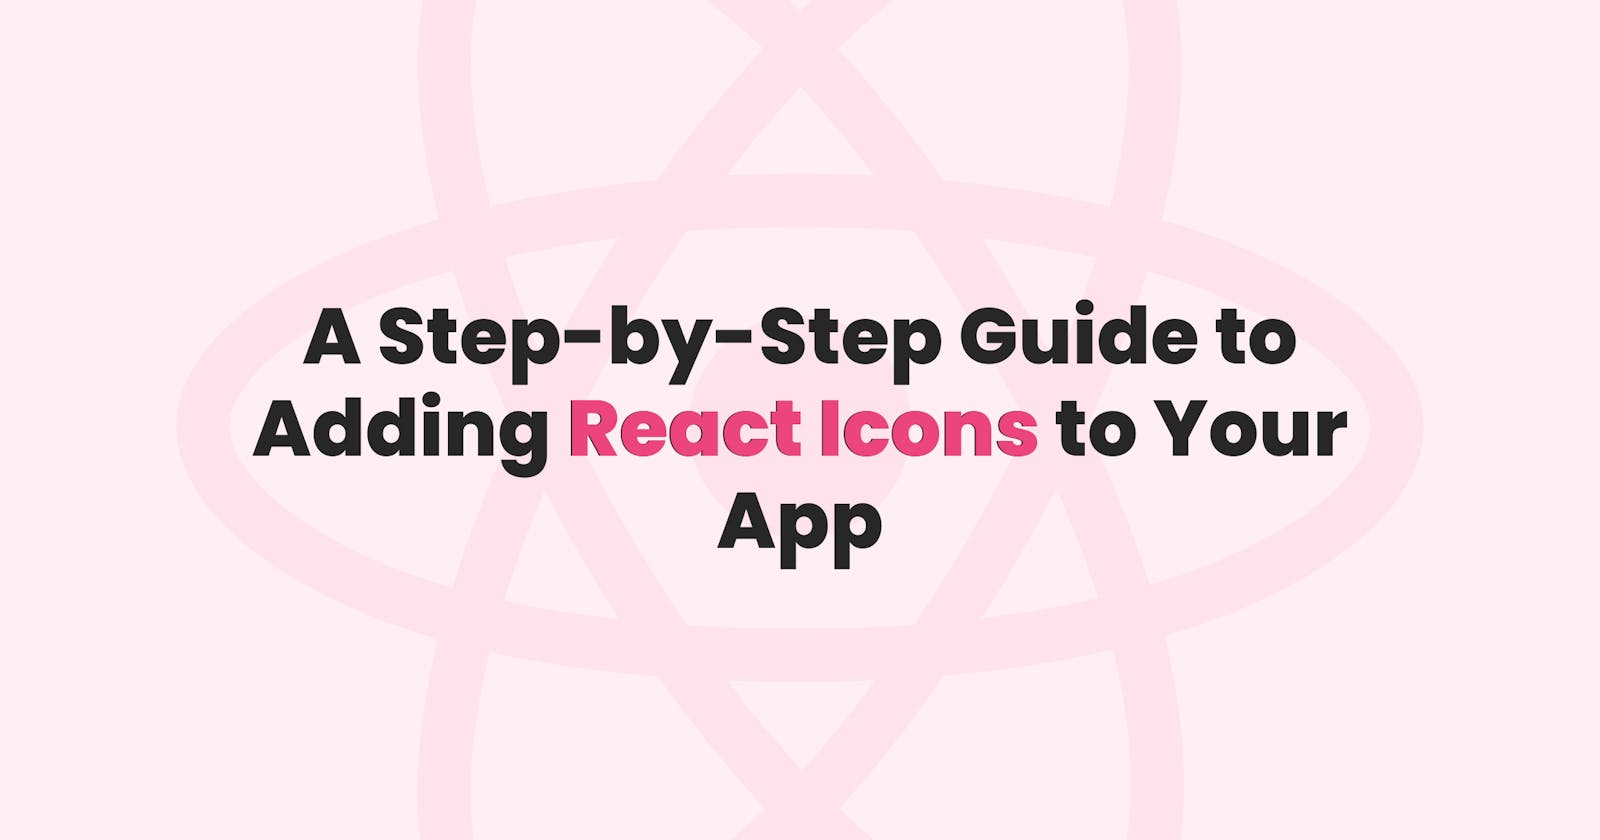 A Step-by-Step Guide to Adding React Icons to Your App